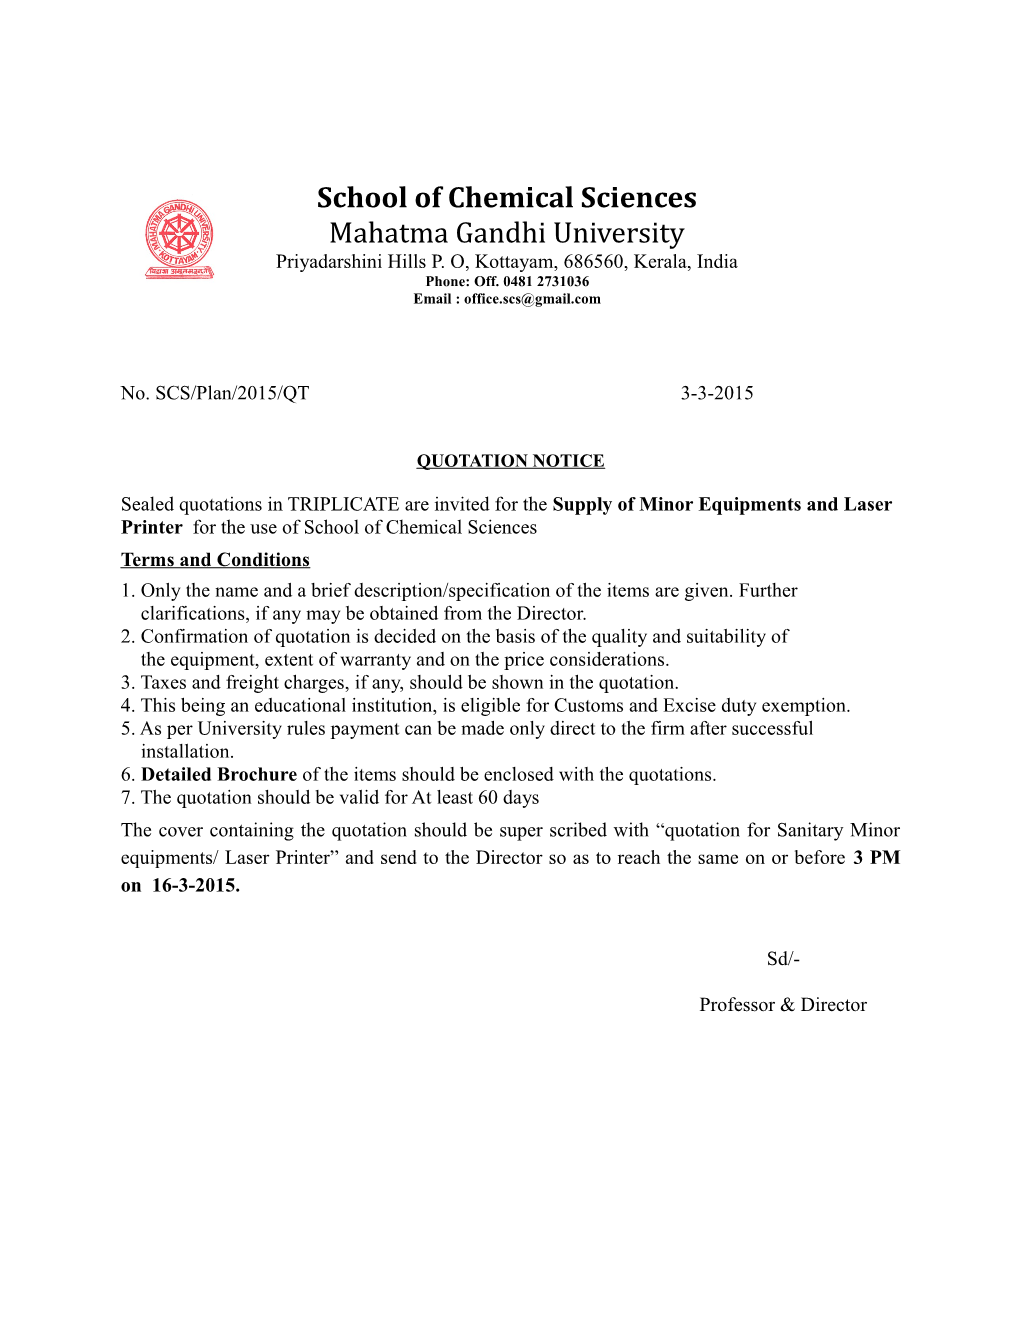 School of Chemical Sciences